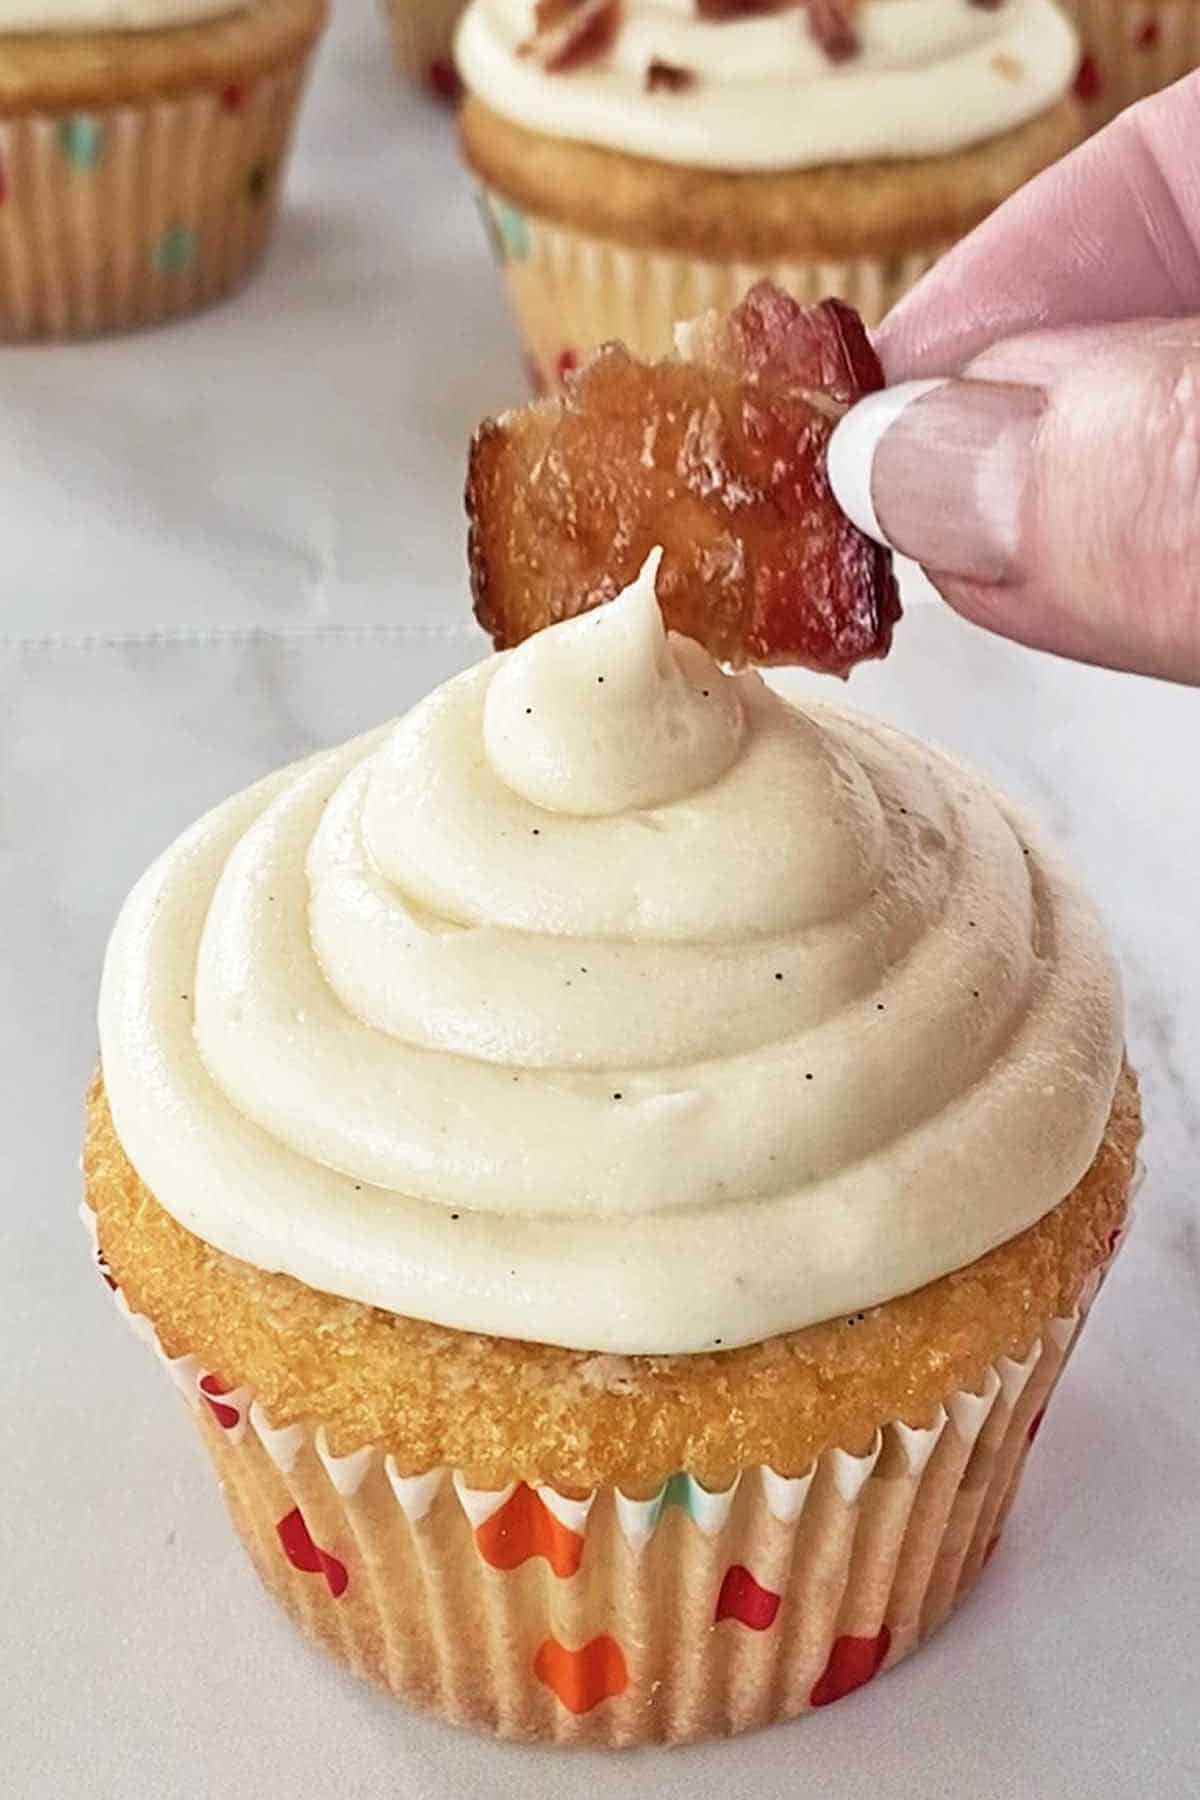 Garnishing a frosted maple bacon cupcake with a piece of maple candied bacon.